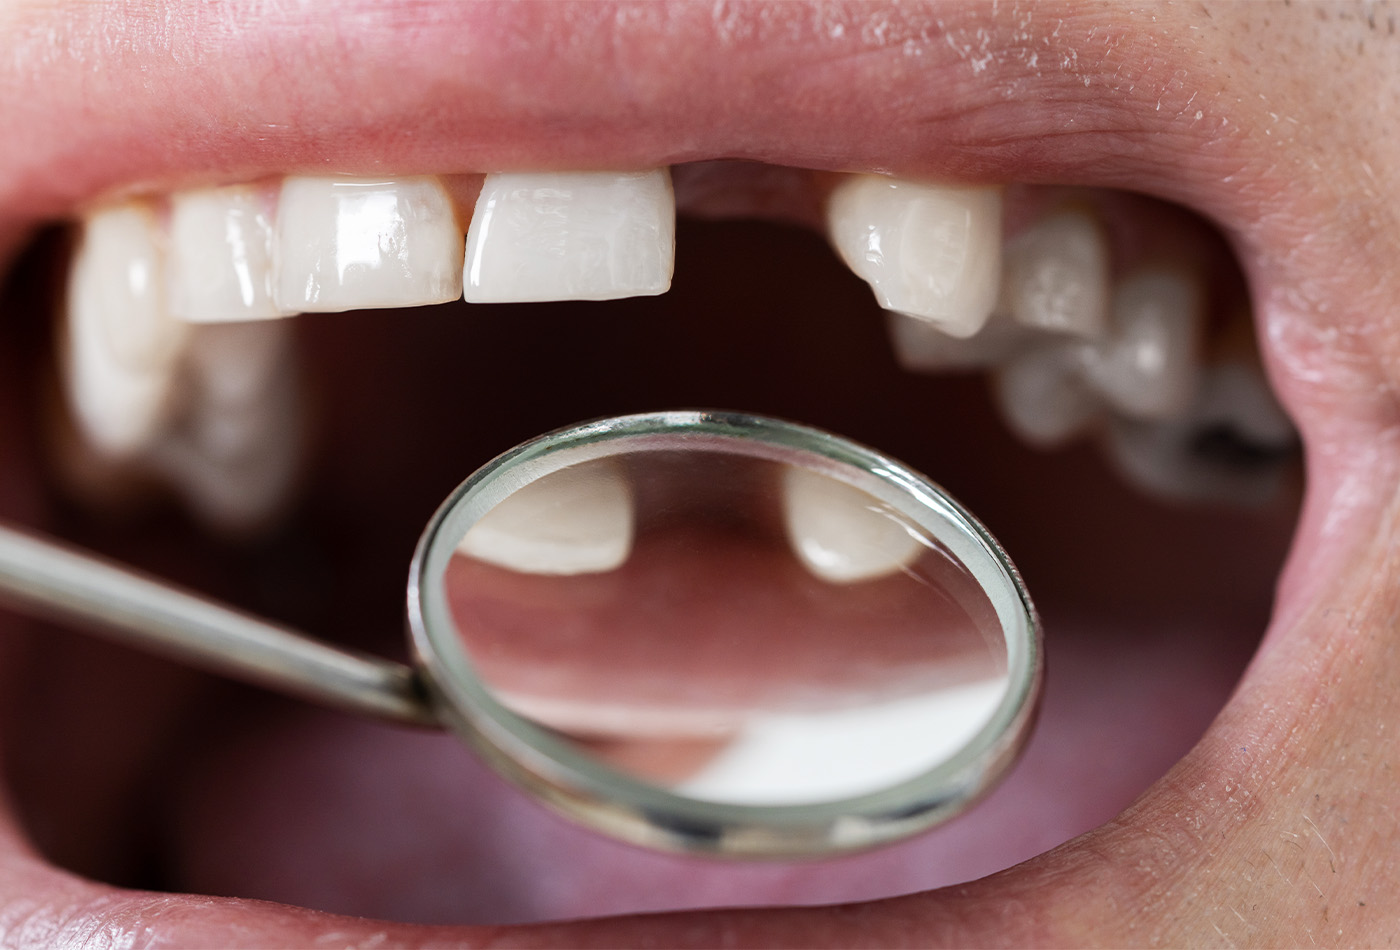 Restoring Your Smile: How to Replace a Missing Tooth?